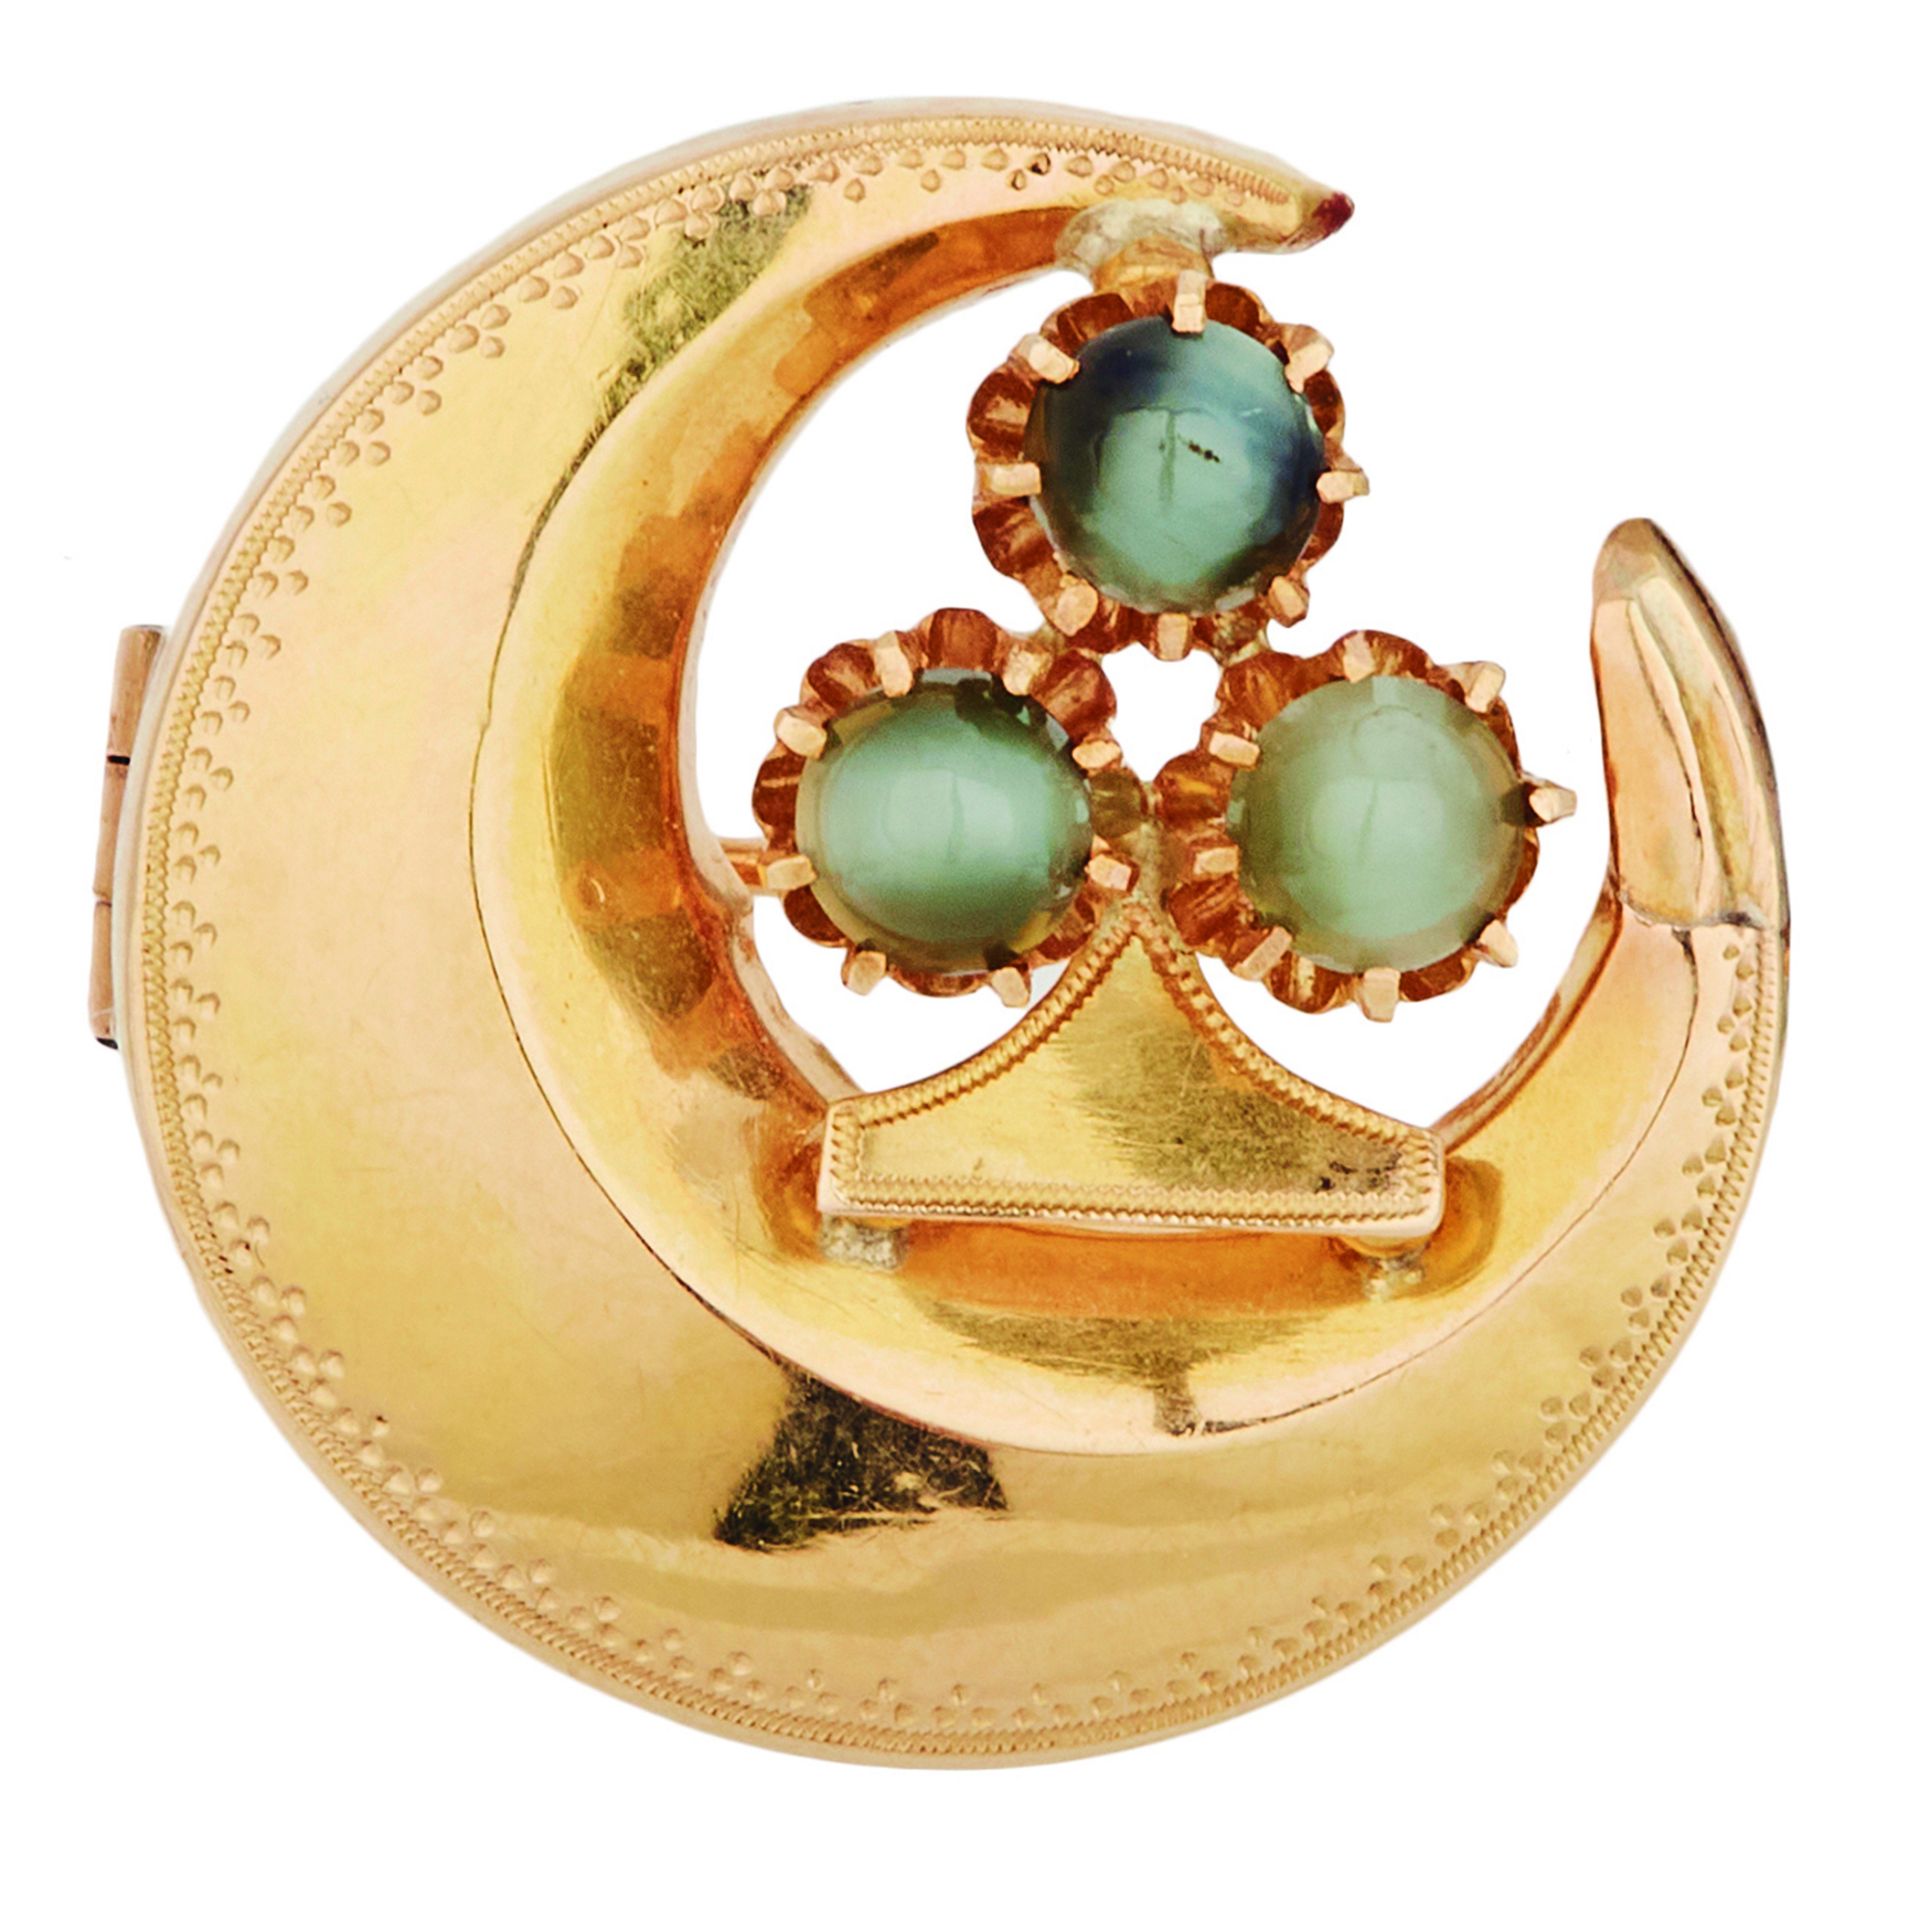 Modernist gold and chrysoberyls brooch, early 20th century.